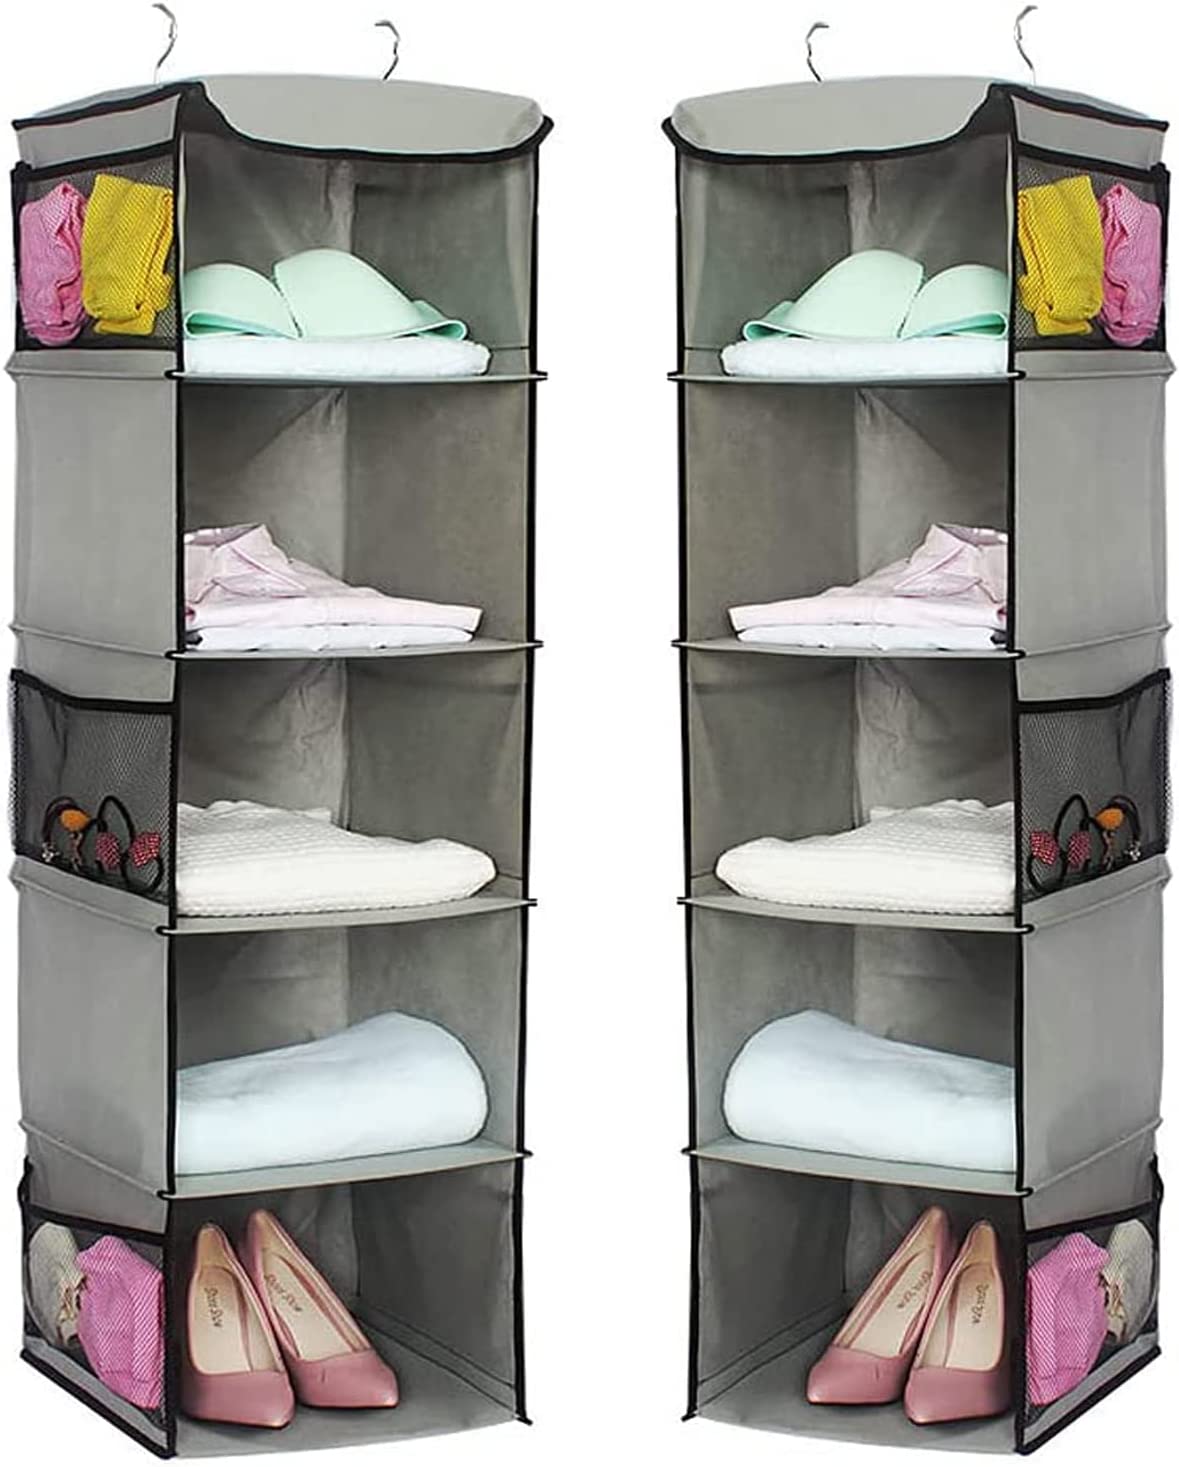 DUAL-SIDED HANGING CLOSET ORGANIZER 🔥 It helps you to quickly iden